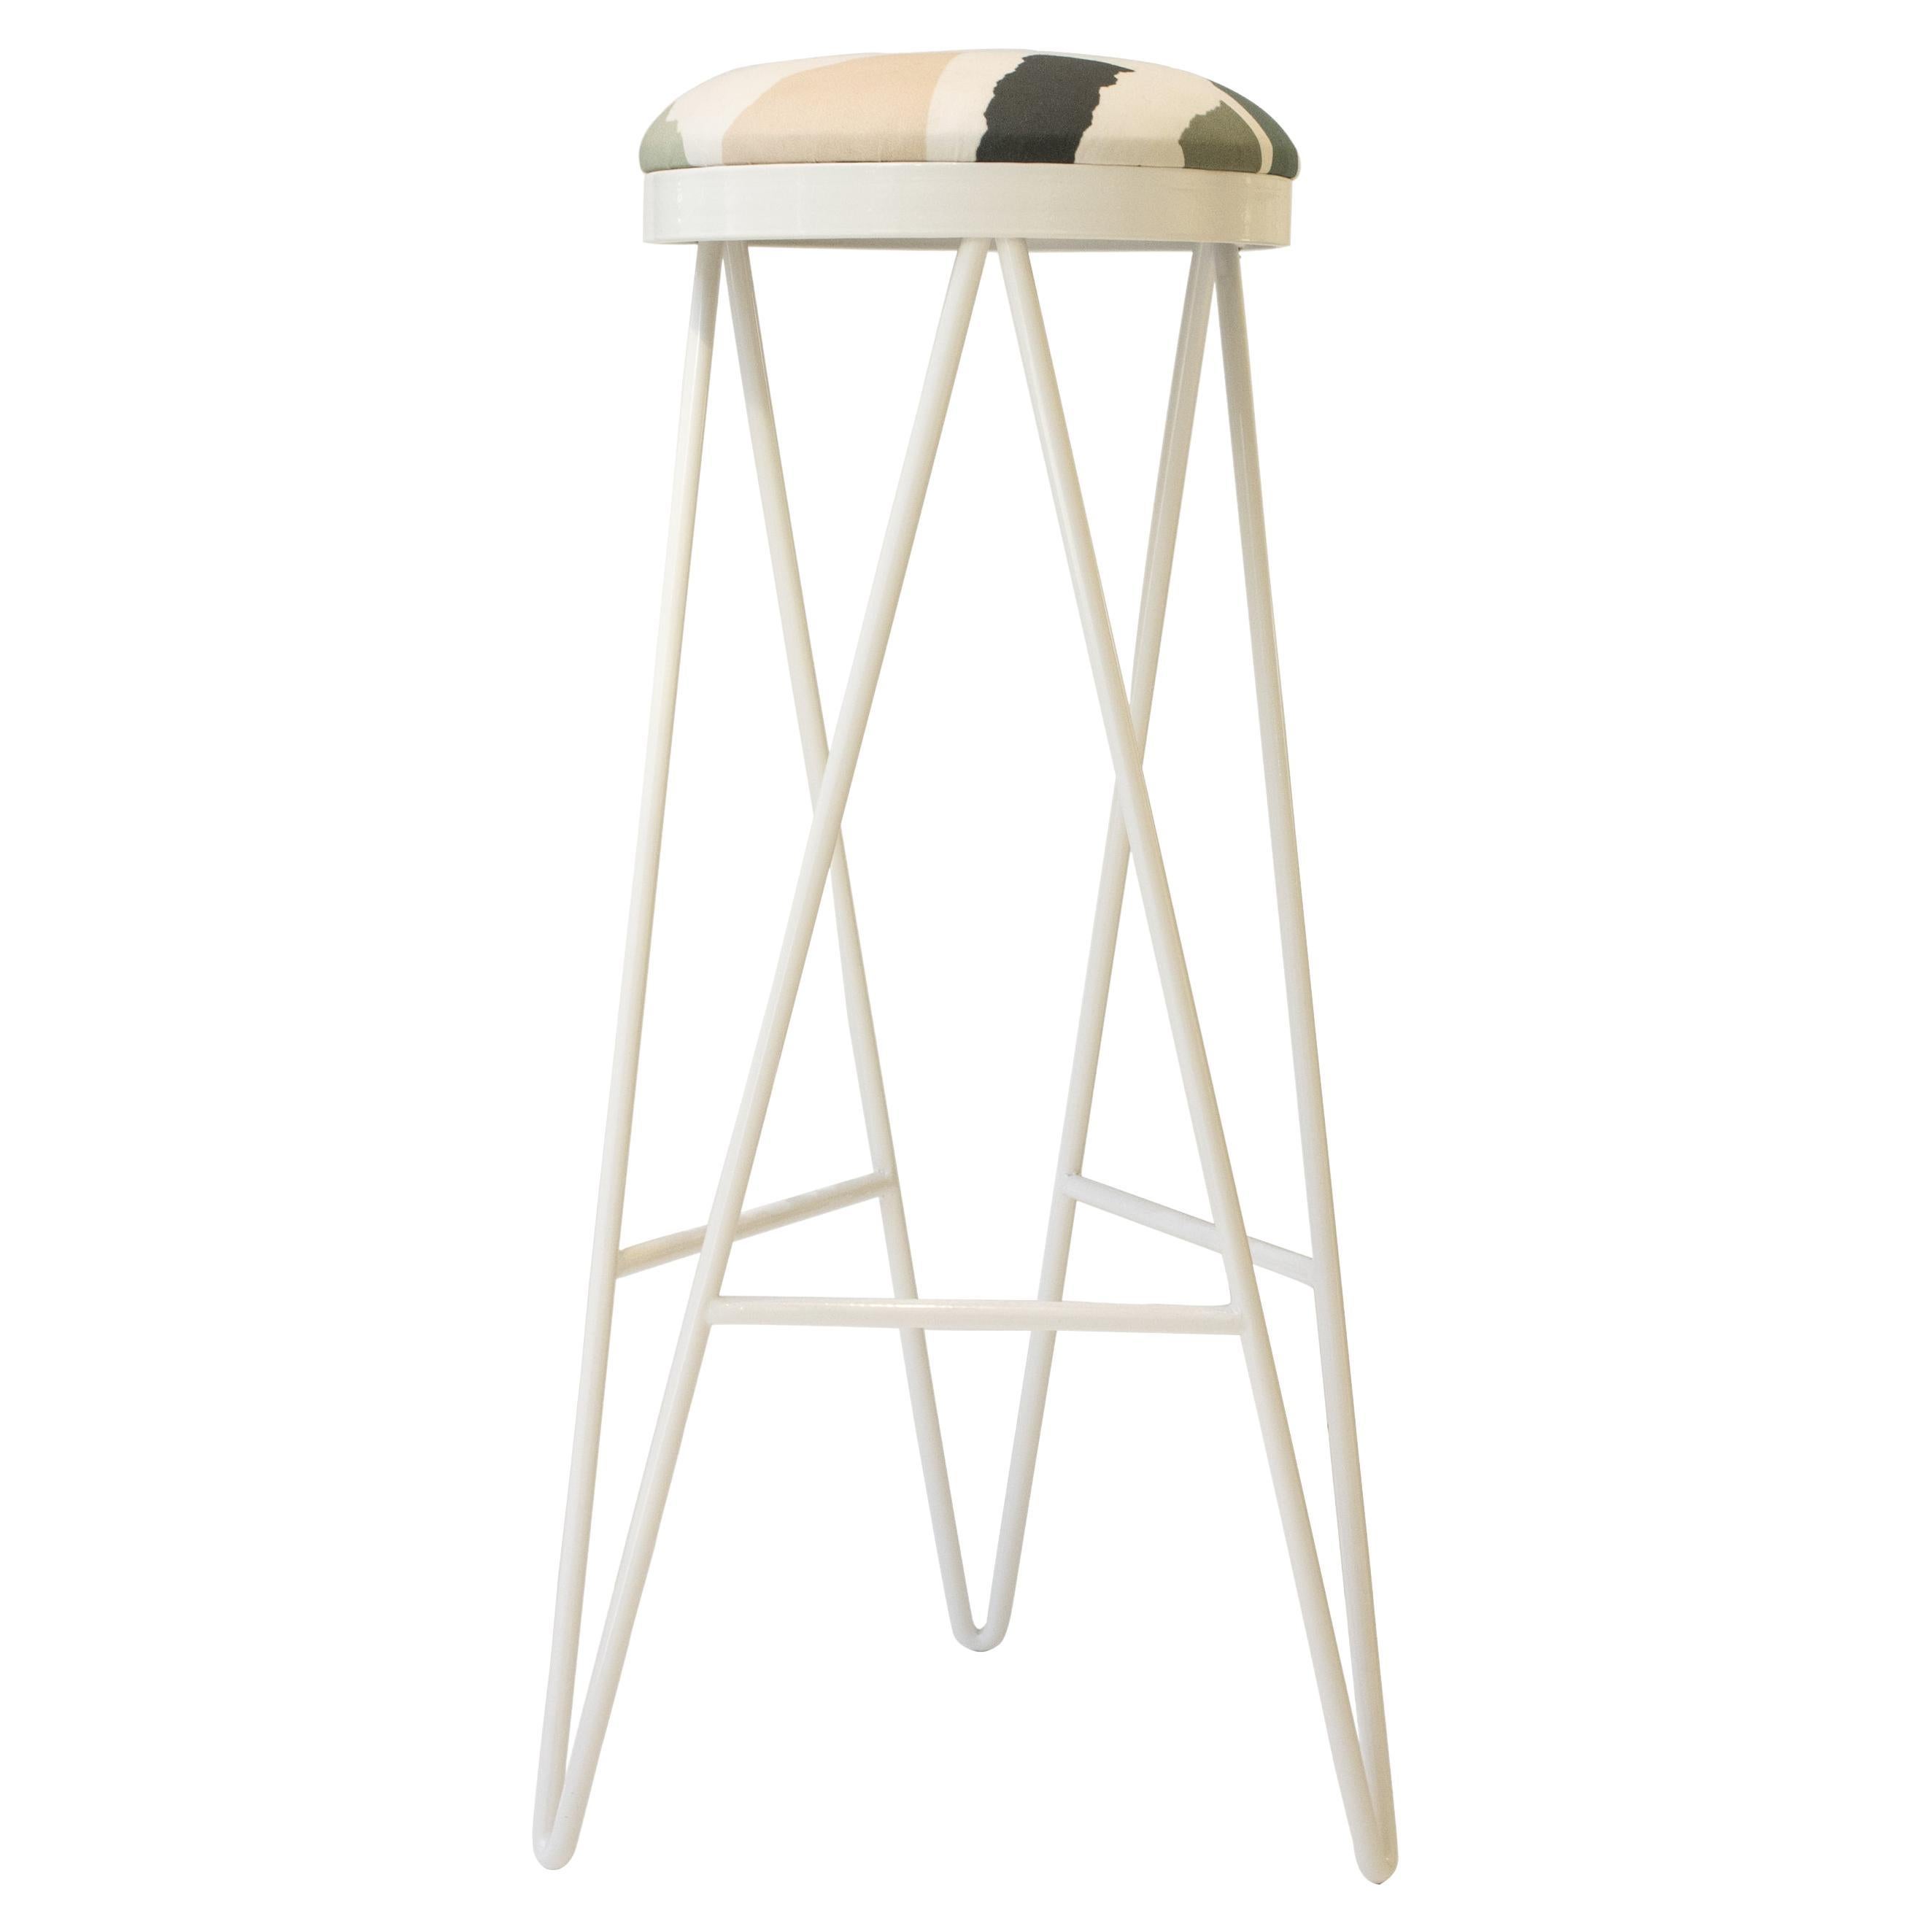 Steel Stool Designed By IKB191 with Geometric Pattaron, Spain 2022. For Sale